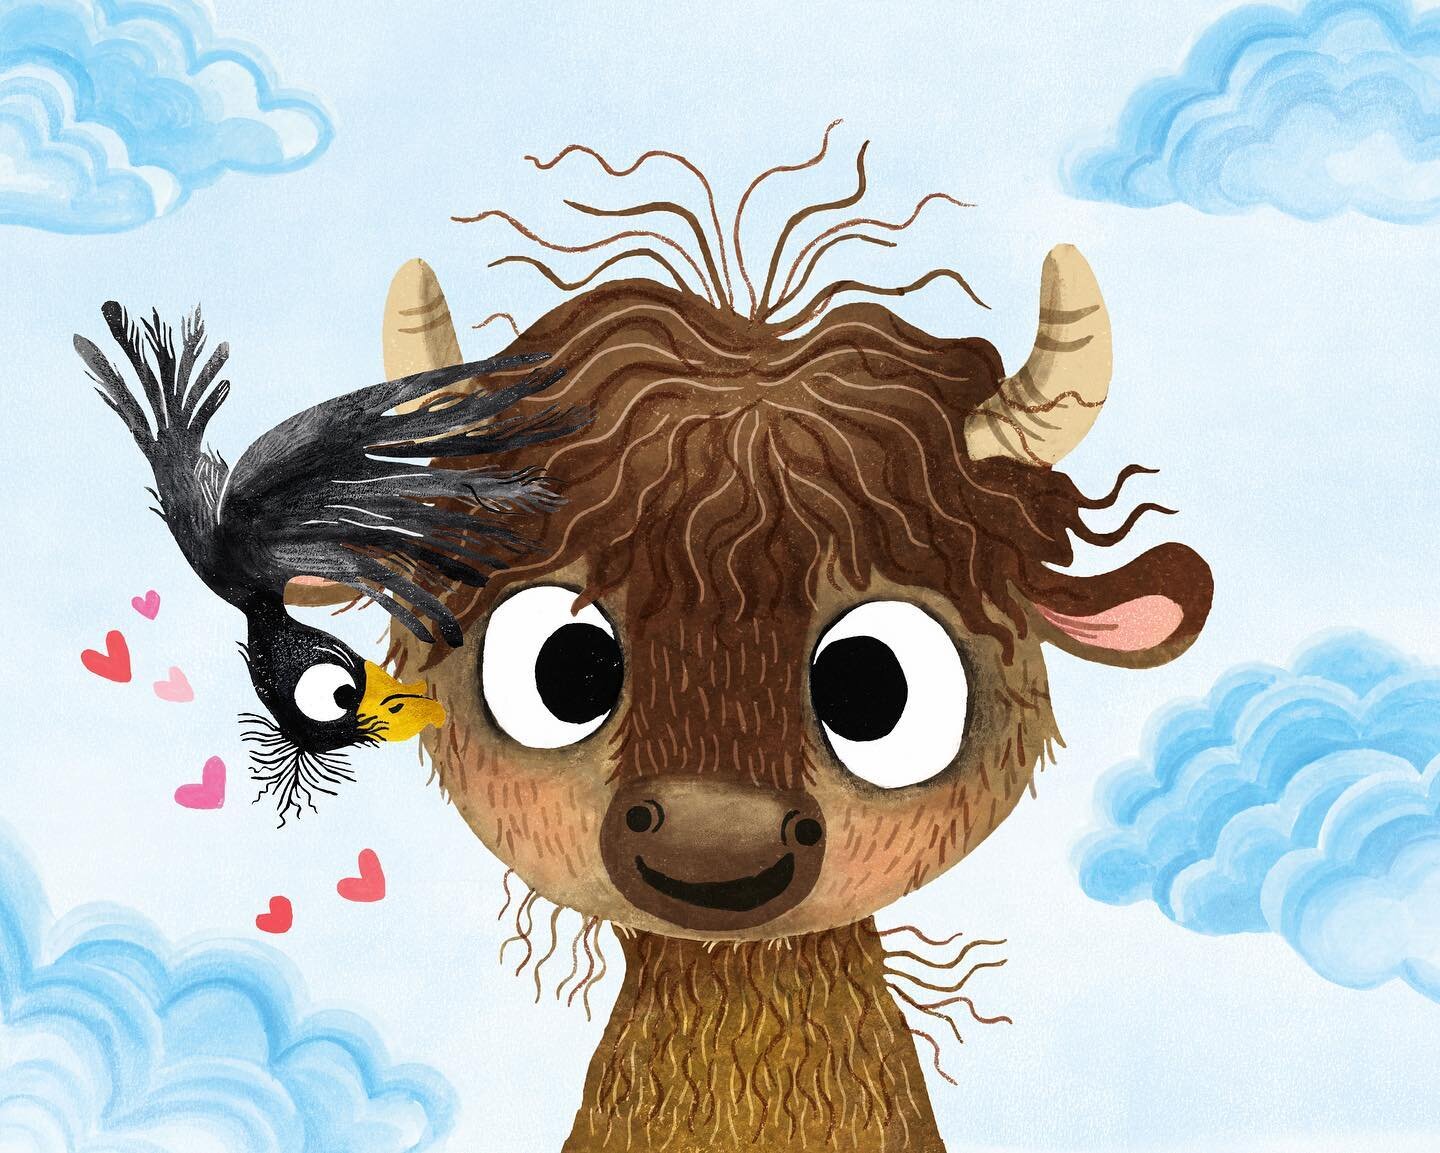 BUFFALO FLUFFALO is back in stock! Find mr.fluff at your local independent bookstore today! @bessbellkalb @randomhousestudio